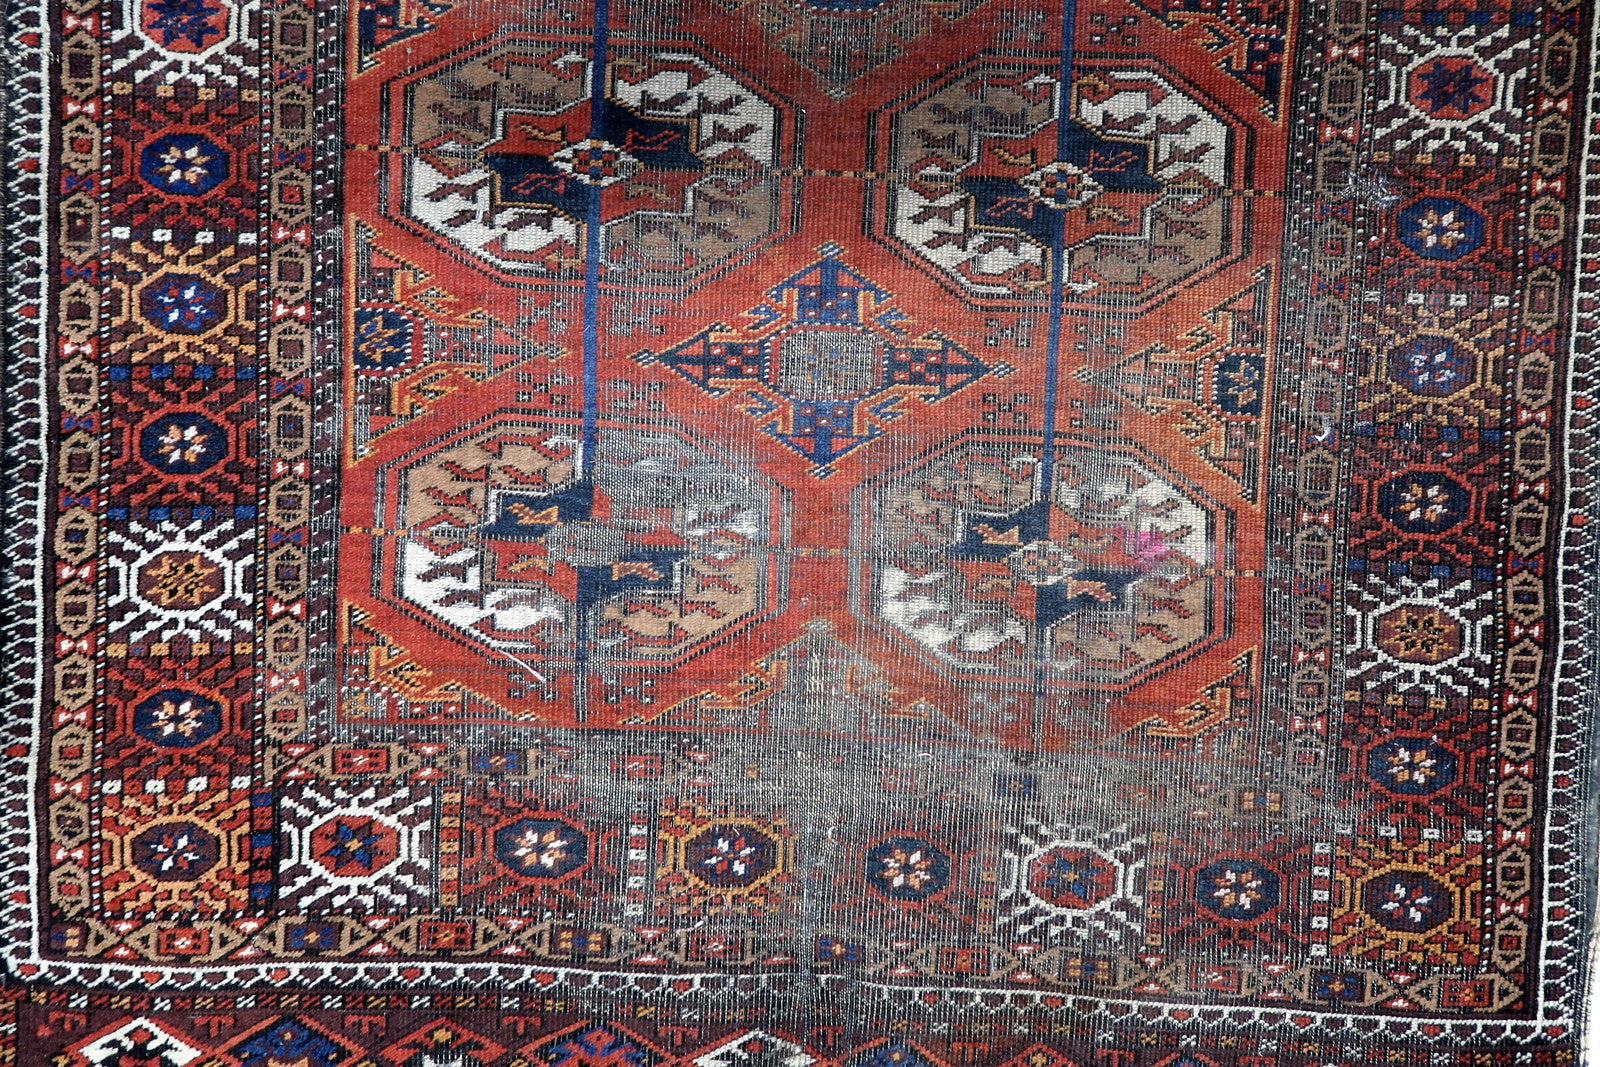 Detailed View of Red and Chocolate Brown Colors on Afghan Baluch Rug